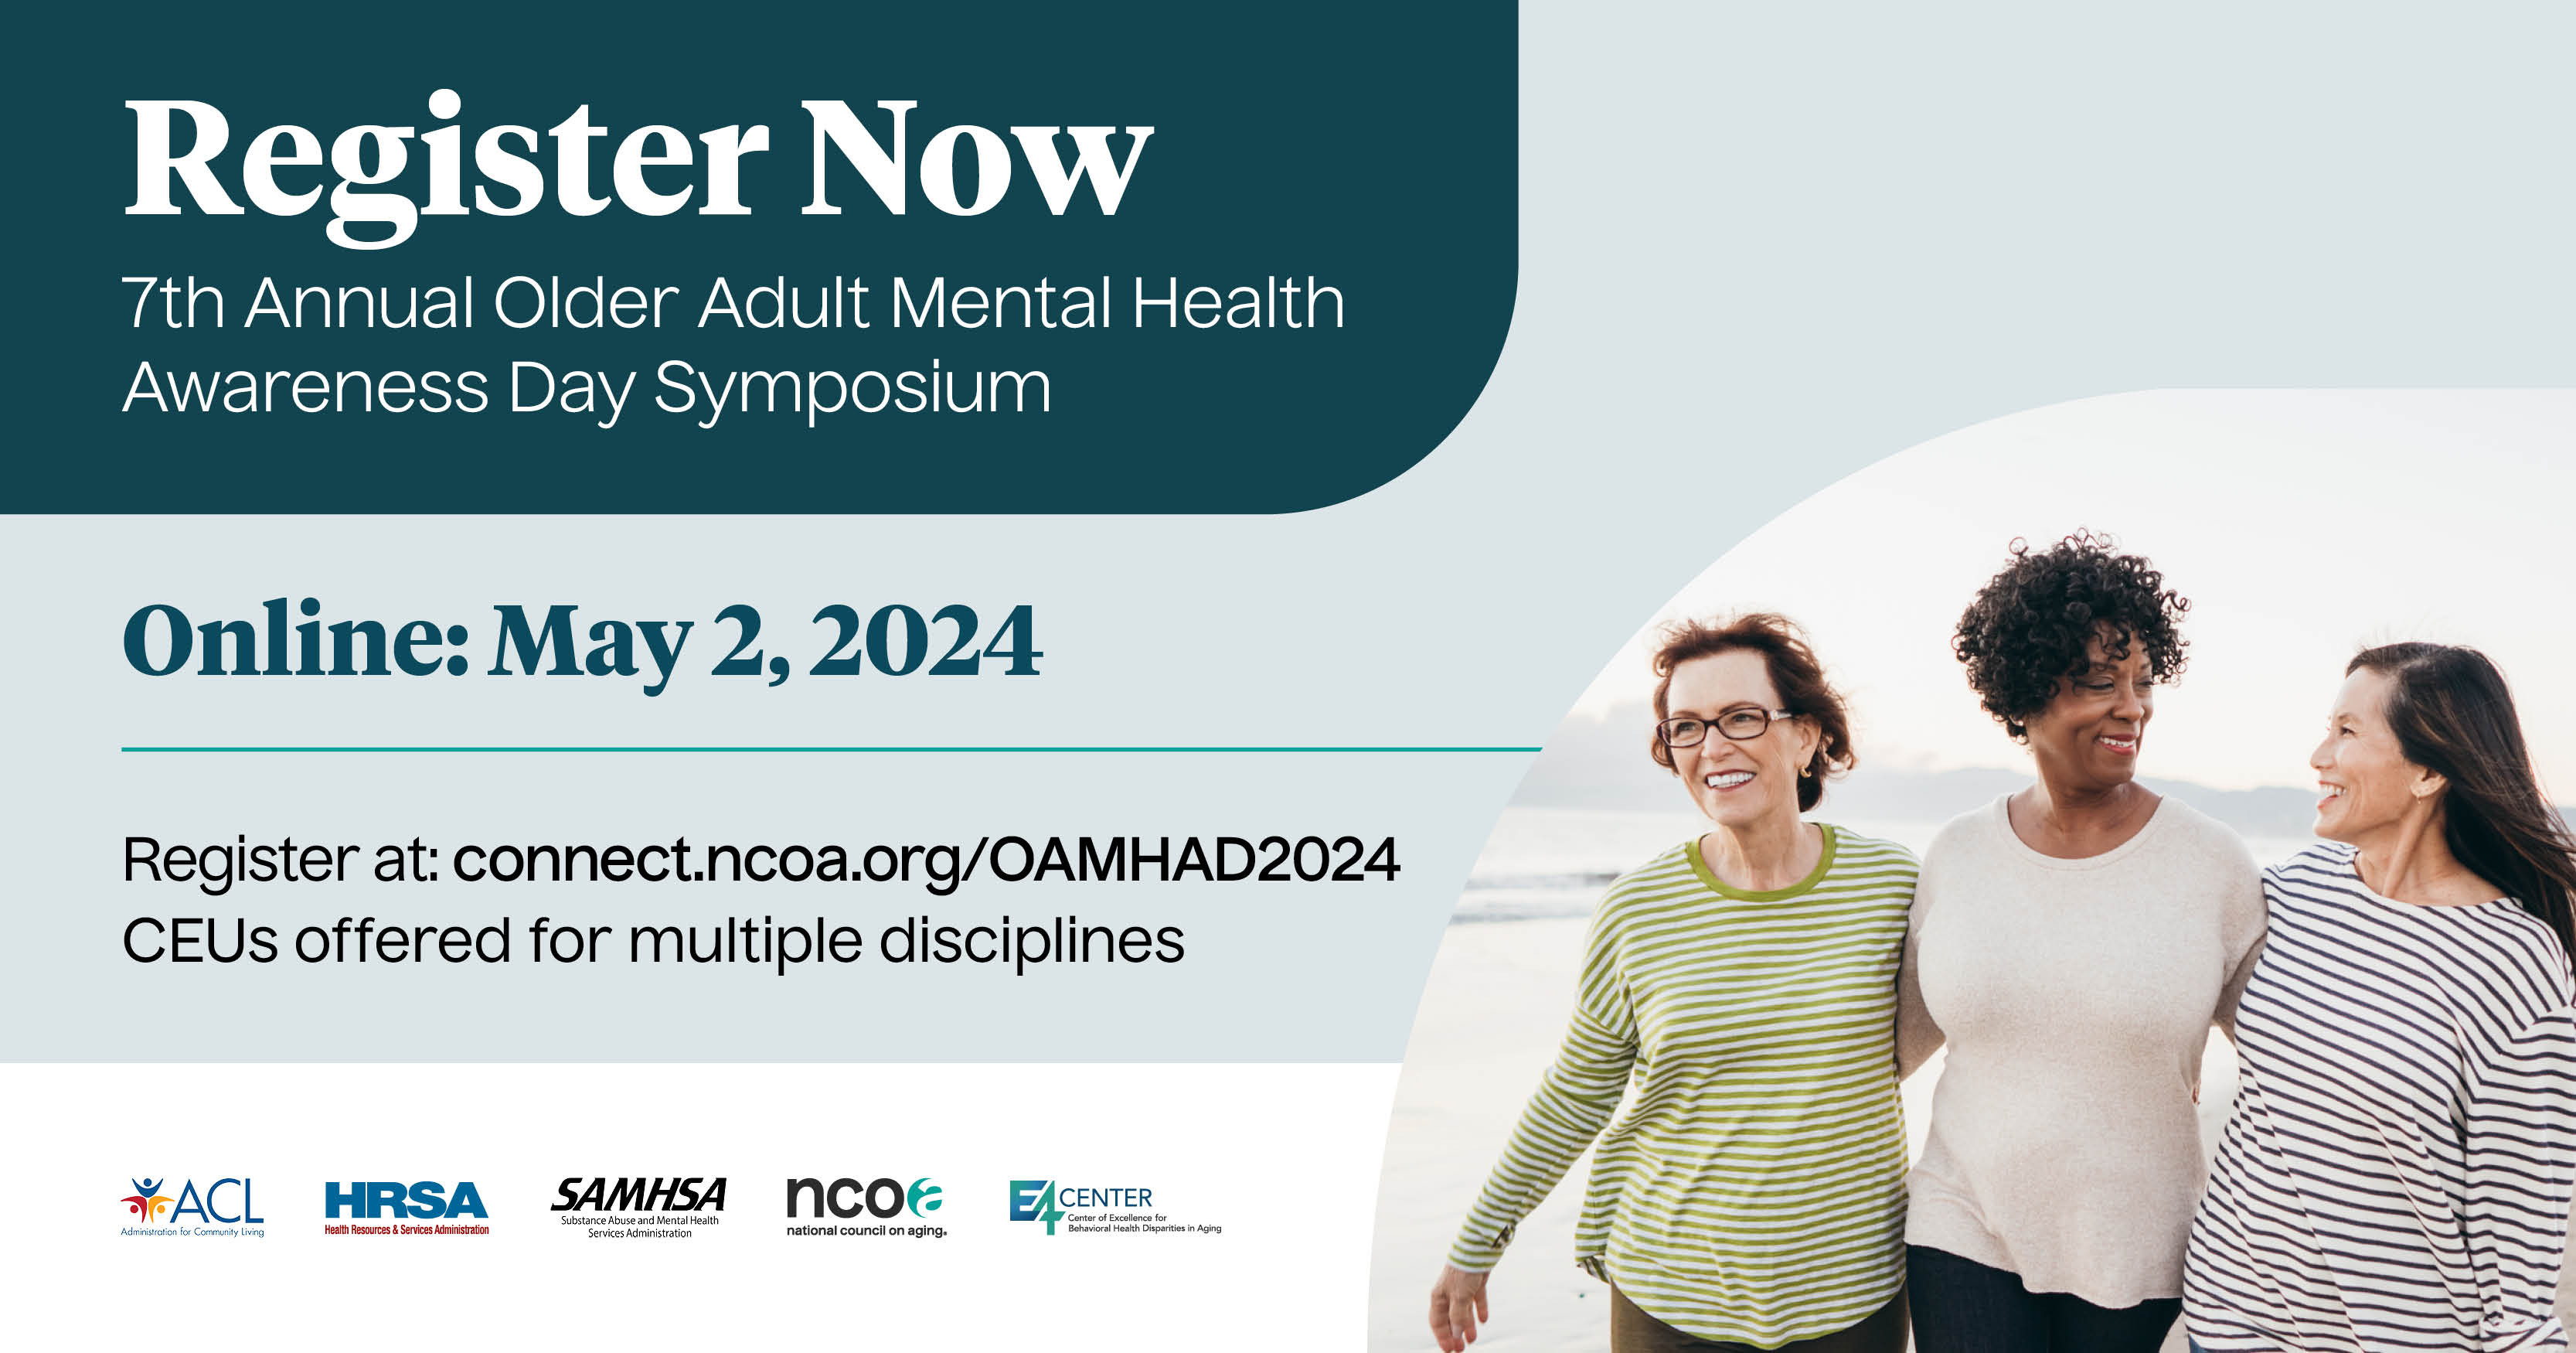 Register now. 7th Annual Older Adult Mental Health Awareness Day Symposium. Online: May 2, 2024. Register at connect.ncoa.org/OAMHAD2024. CEUs offered for multiple disciplines. Logos: Administration for Community Living, Health Resources and Services Administration, Substance Abuse and Mental Health Services Administration, National Council on Aging, E4 Center of Excellence for Behavioral Health Disparities in Aging